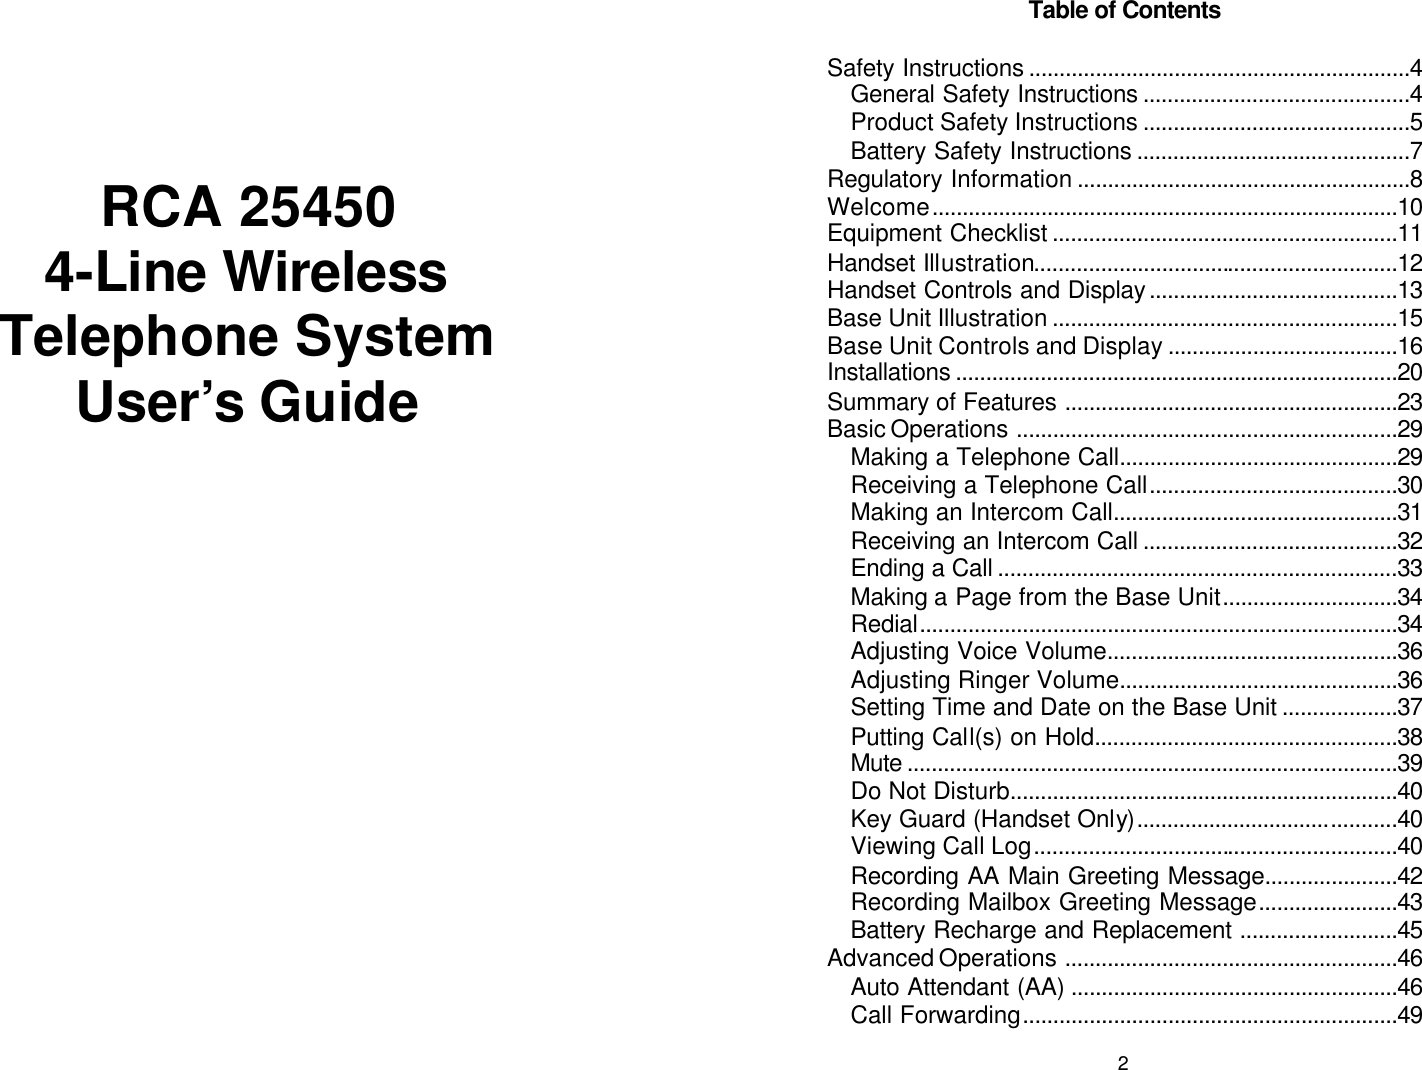        RCA 25450  4-Line Wireless Telephone System User’s Guide  2 Table of Contents  Safety Instructions ...............................................................4 General Safety Instructions ............................................4 Product Safety Instructions ............................................5 Battery Safety Instructions .............................................7 Regulatory Information .......................................................8 Welcome.............................................................................10 Equipment Checklist .........................................................11 Handset Illustration............................................................12 Handset Controls and Display.........................................13 Base Unit Illustration .........................................................15 Base Unit Controls and Display ......................................16 Installations .........................................................................20 Summary of Features .......................................................23 Basic Operations ...............................................................29 Making a Telephone Call..............................................29 Receiving a Telephone Call.........................................30 Making an Intercom Call...............................................31 Receiving an Intercom Call ..........................................32 Ending a Call ..................................................................33 Making a Page from the Base Unit.............................34 Redial...............................................................................34 Adjusting Voice Volume................................................36 Adjusting Ringer Volume..............................................36 Setting Time and Date on the Base Unit ...................37 Putting Call(s) on Hold..................................................38 Mute .................................................................................39 Do Not Disturb................................................................40 Key Guard (Handset Only)...........................................40 Viewing Call Log............................................................40 Recording AA Main Greeting Message......................42 Recording Mailbox Greeting Message.......................43 Battery Recharge and Replacement ..........................45 Advanced Operations .......................................................46 Auto Attendant (AA) ......................................................46 Call Forwarding..............................................................49 